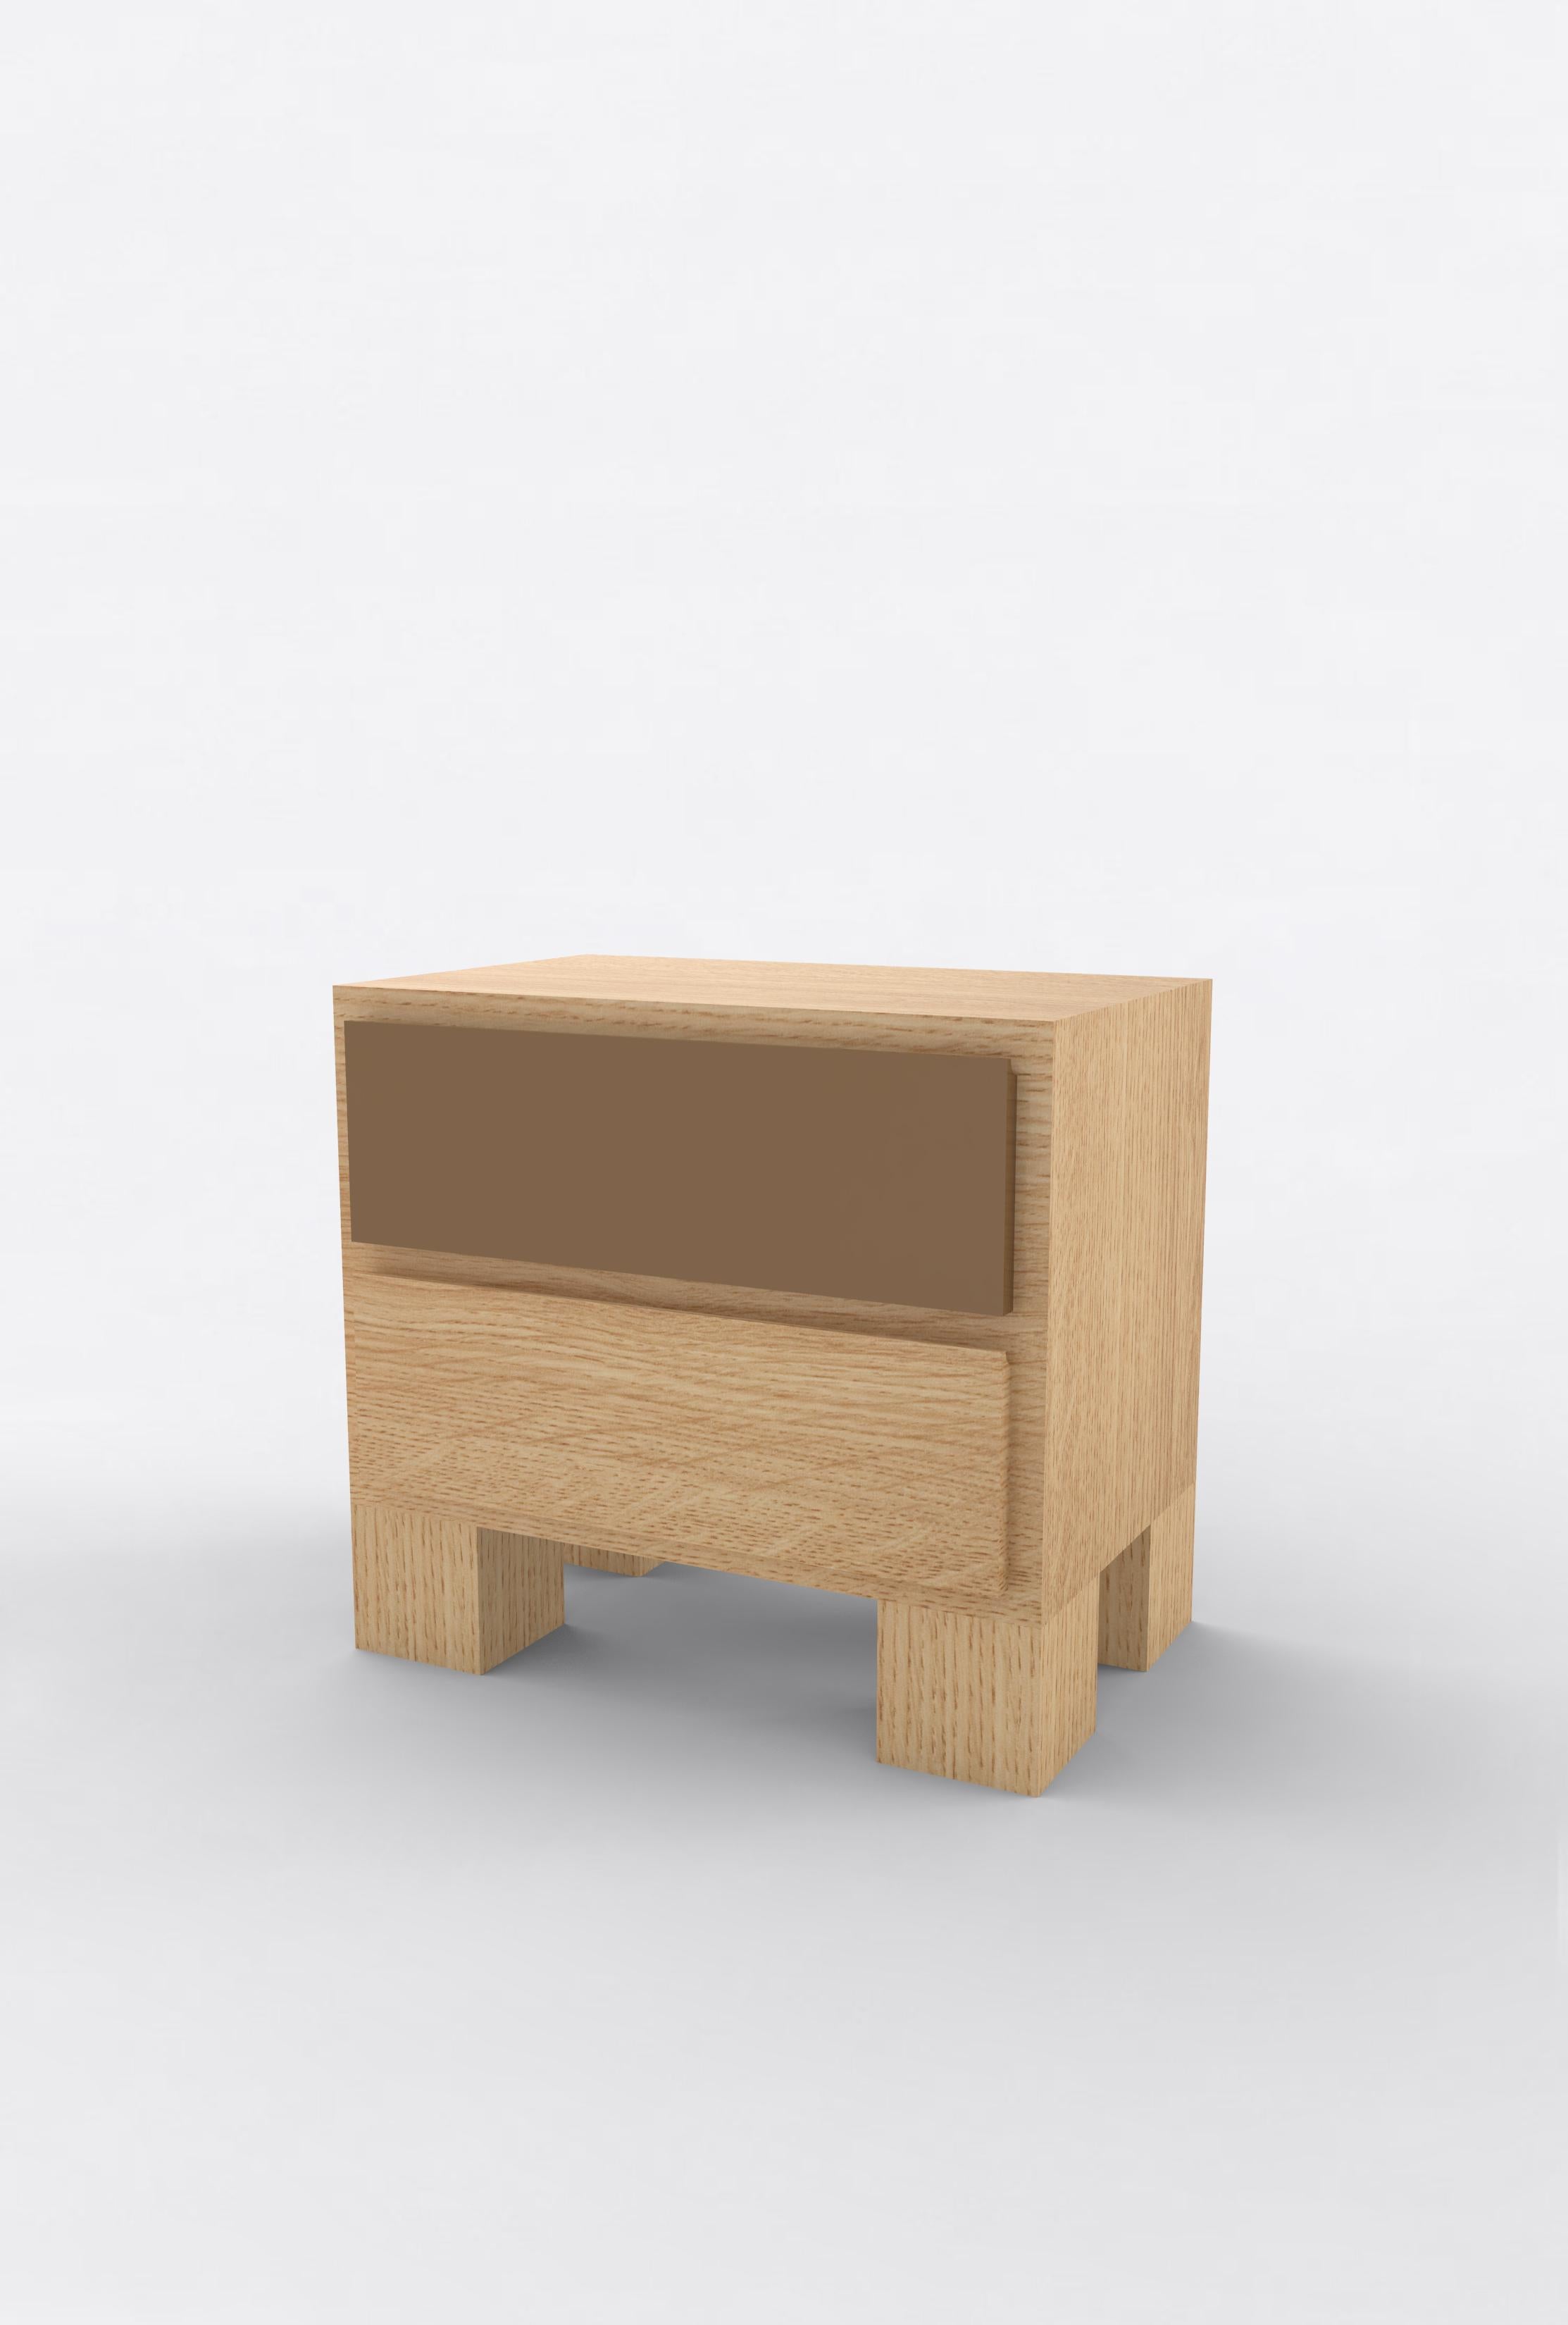 Contemporary 101 Bedside in Oak and Color by Orphan Work, 2020 For Sale 1